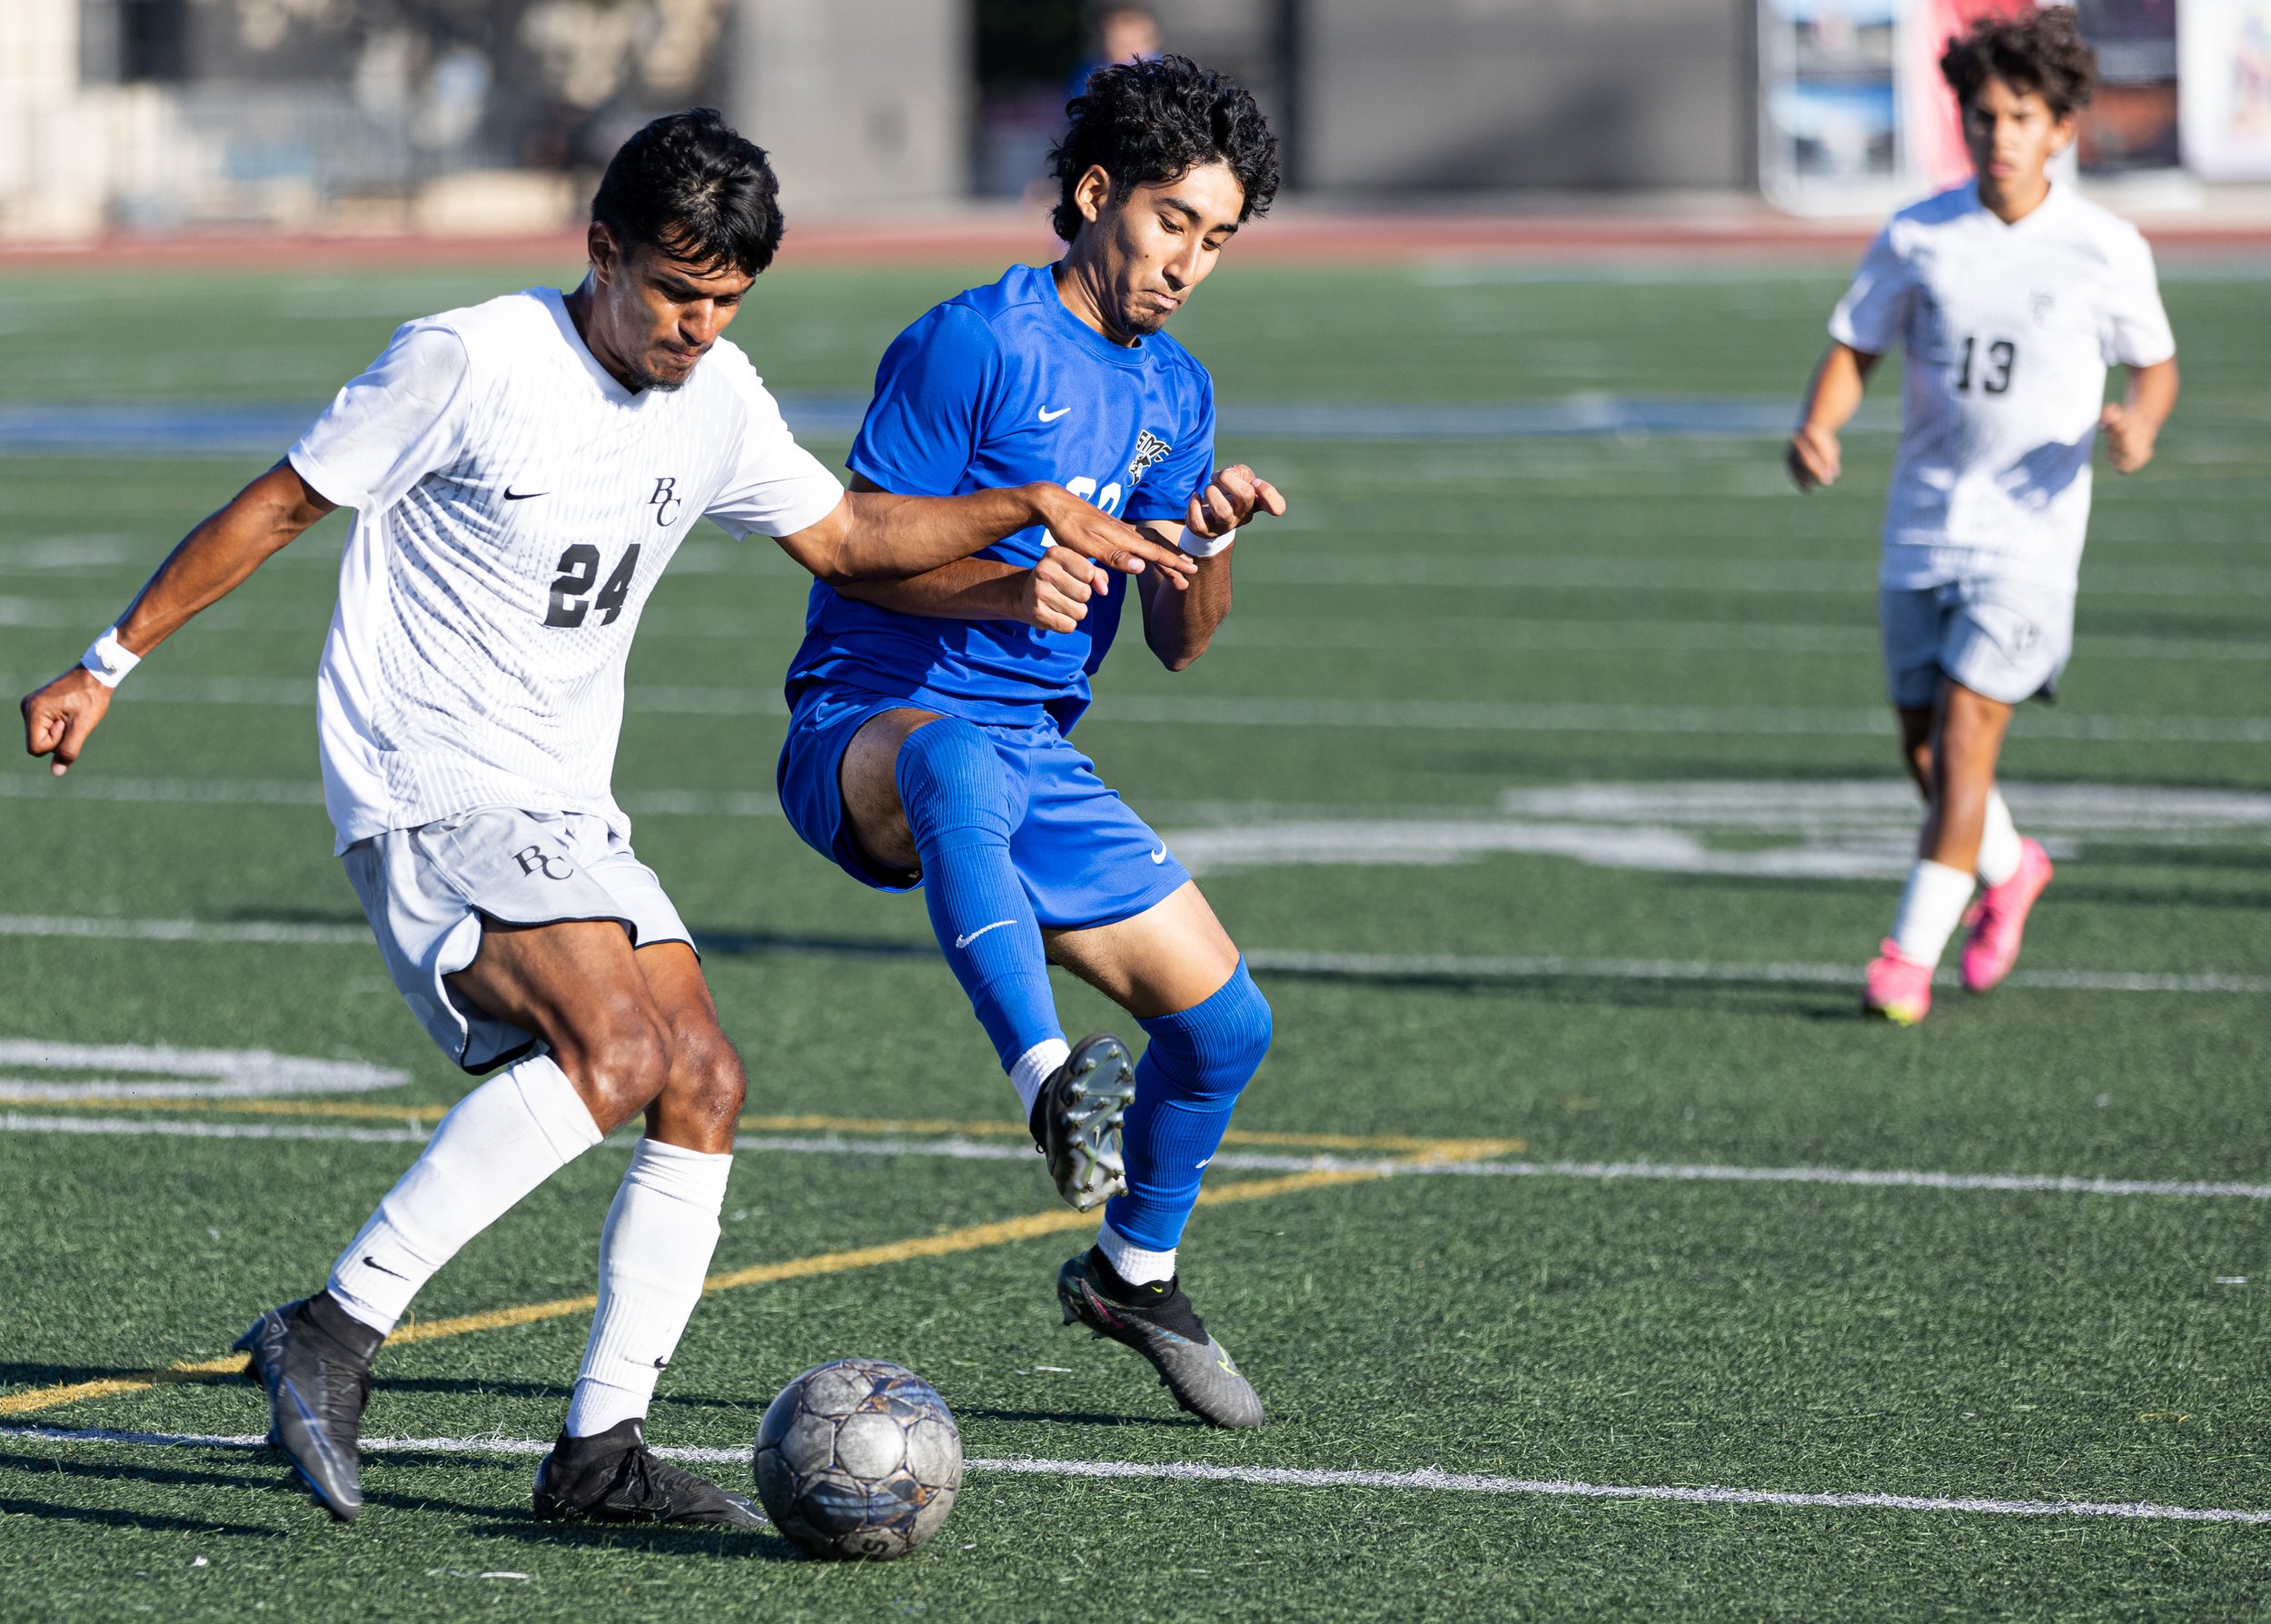  Santa Monica College(SMC) men's soccer midfielder Alex Hernandez(R) attempting to take the ball away from Bakersfield Renegade defender Joe Estrada(24) on Tues, Oct. 3. SMC would go and shutout the Renegades with a score of 3-0 at Corsair Field in S